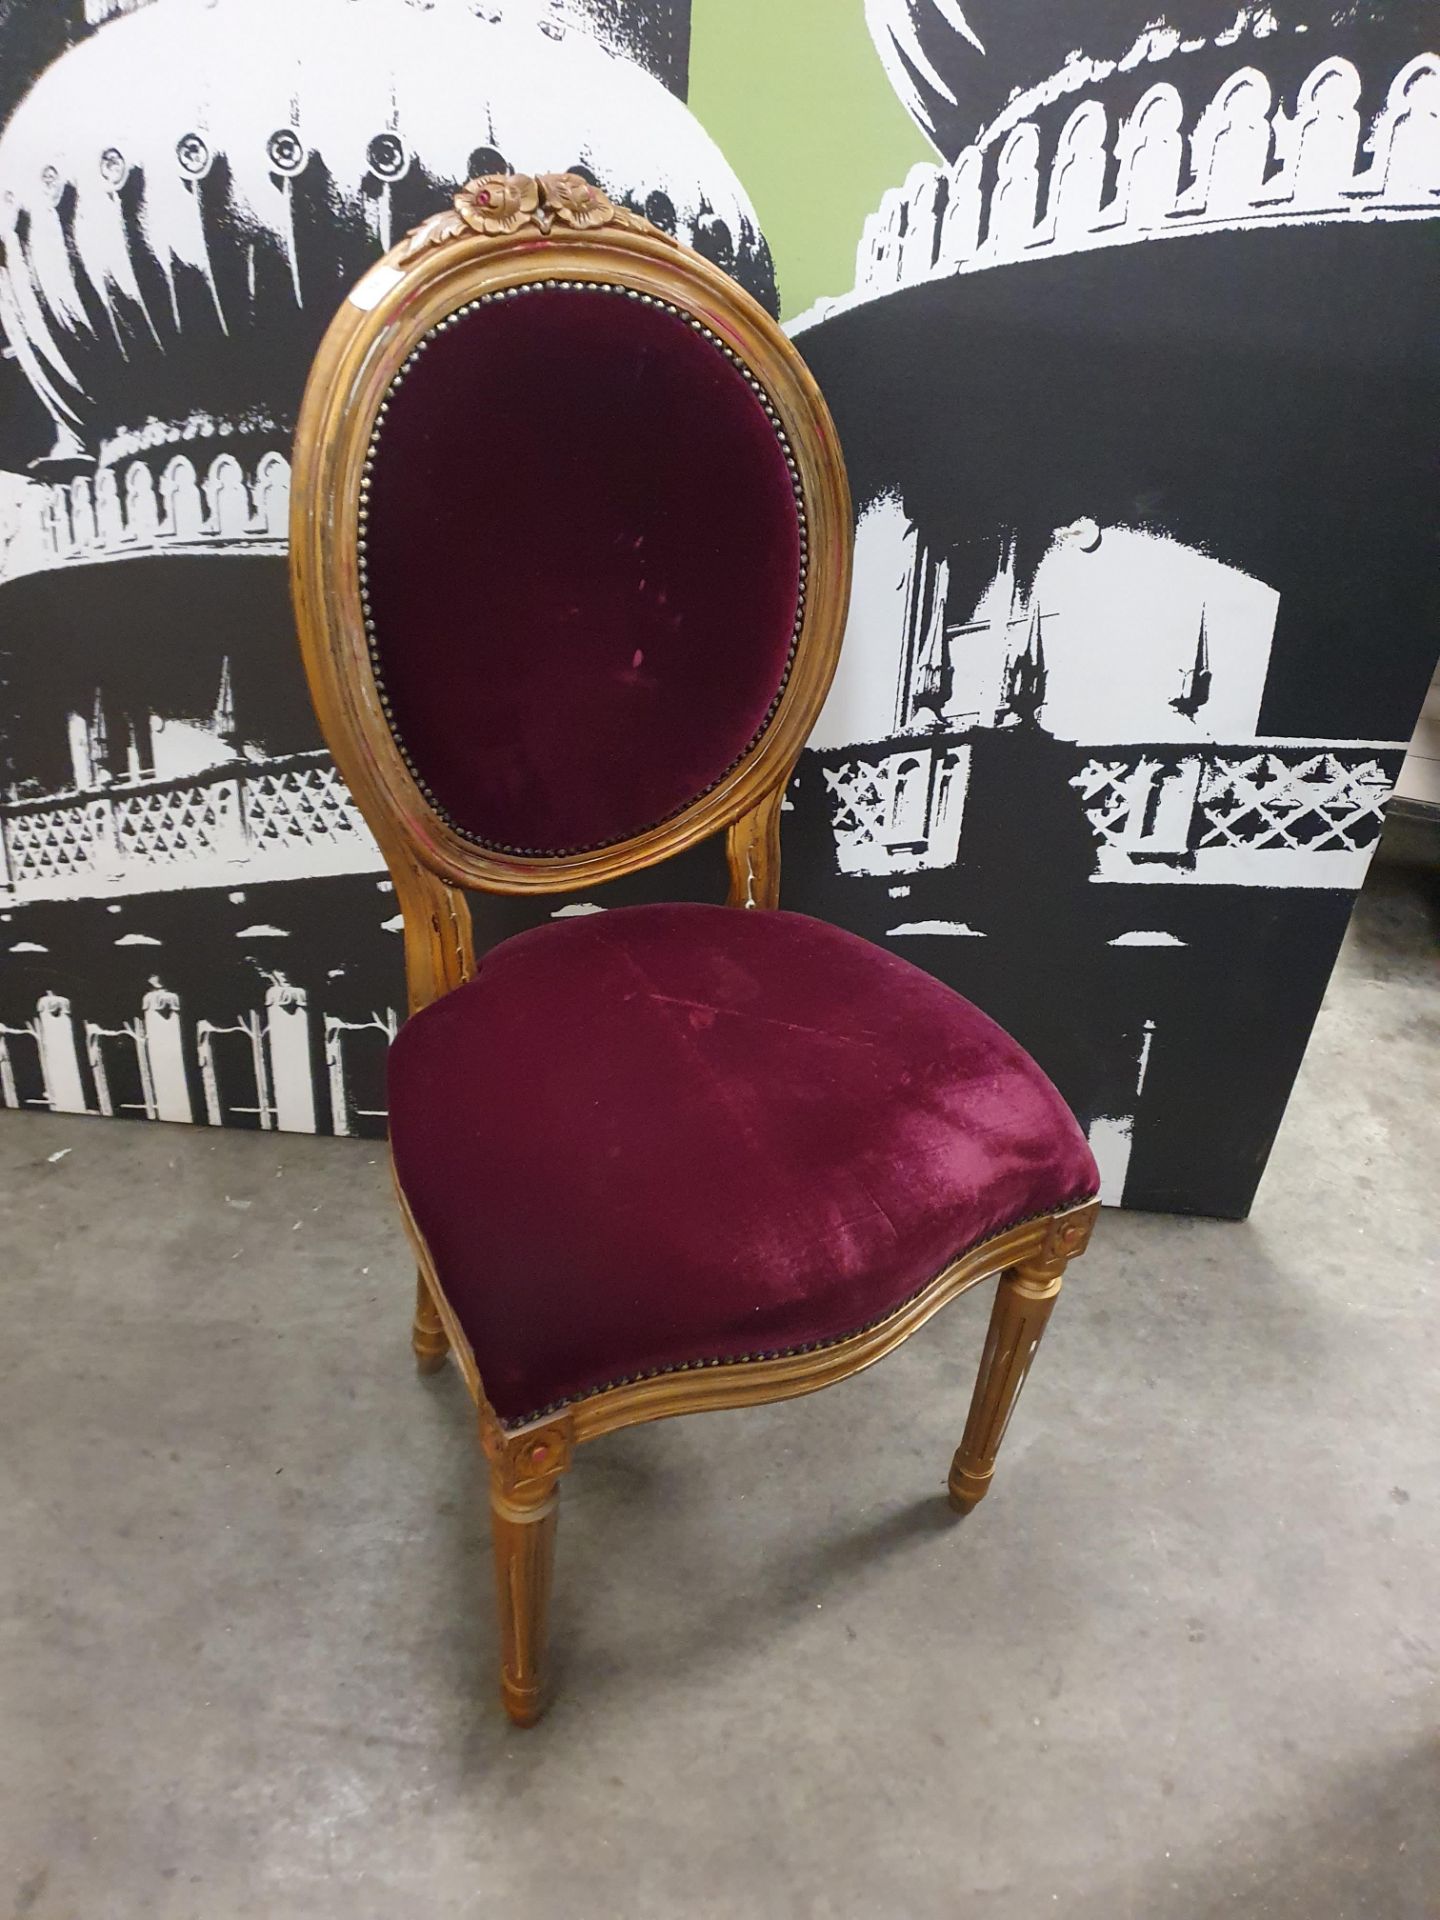 * ornate chair with red velvet seat